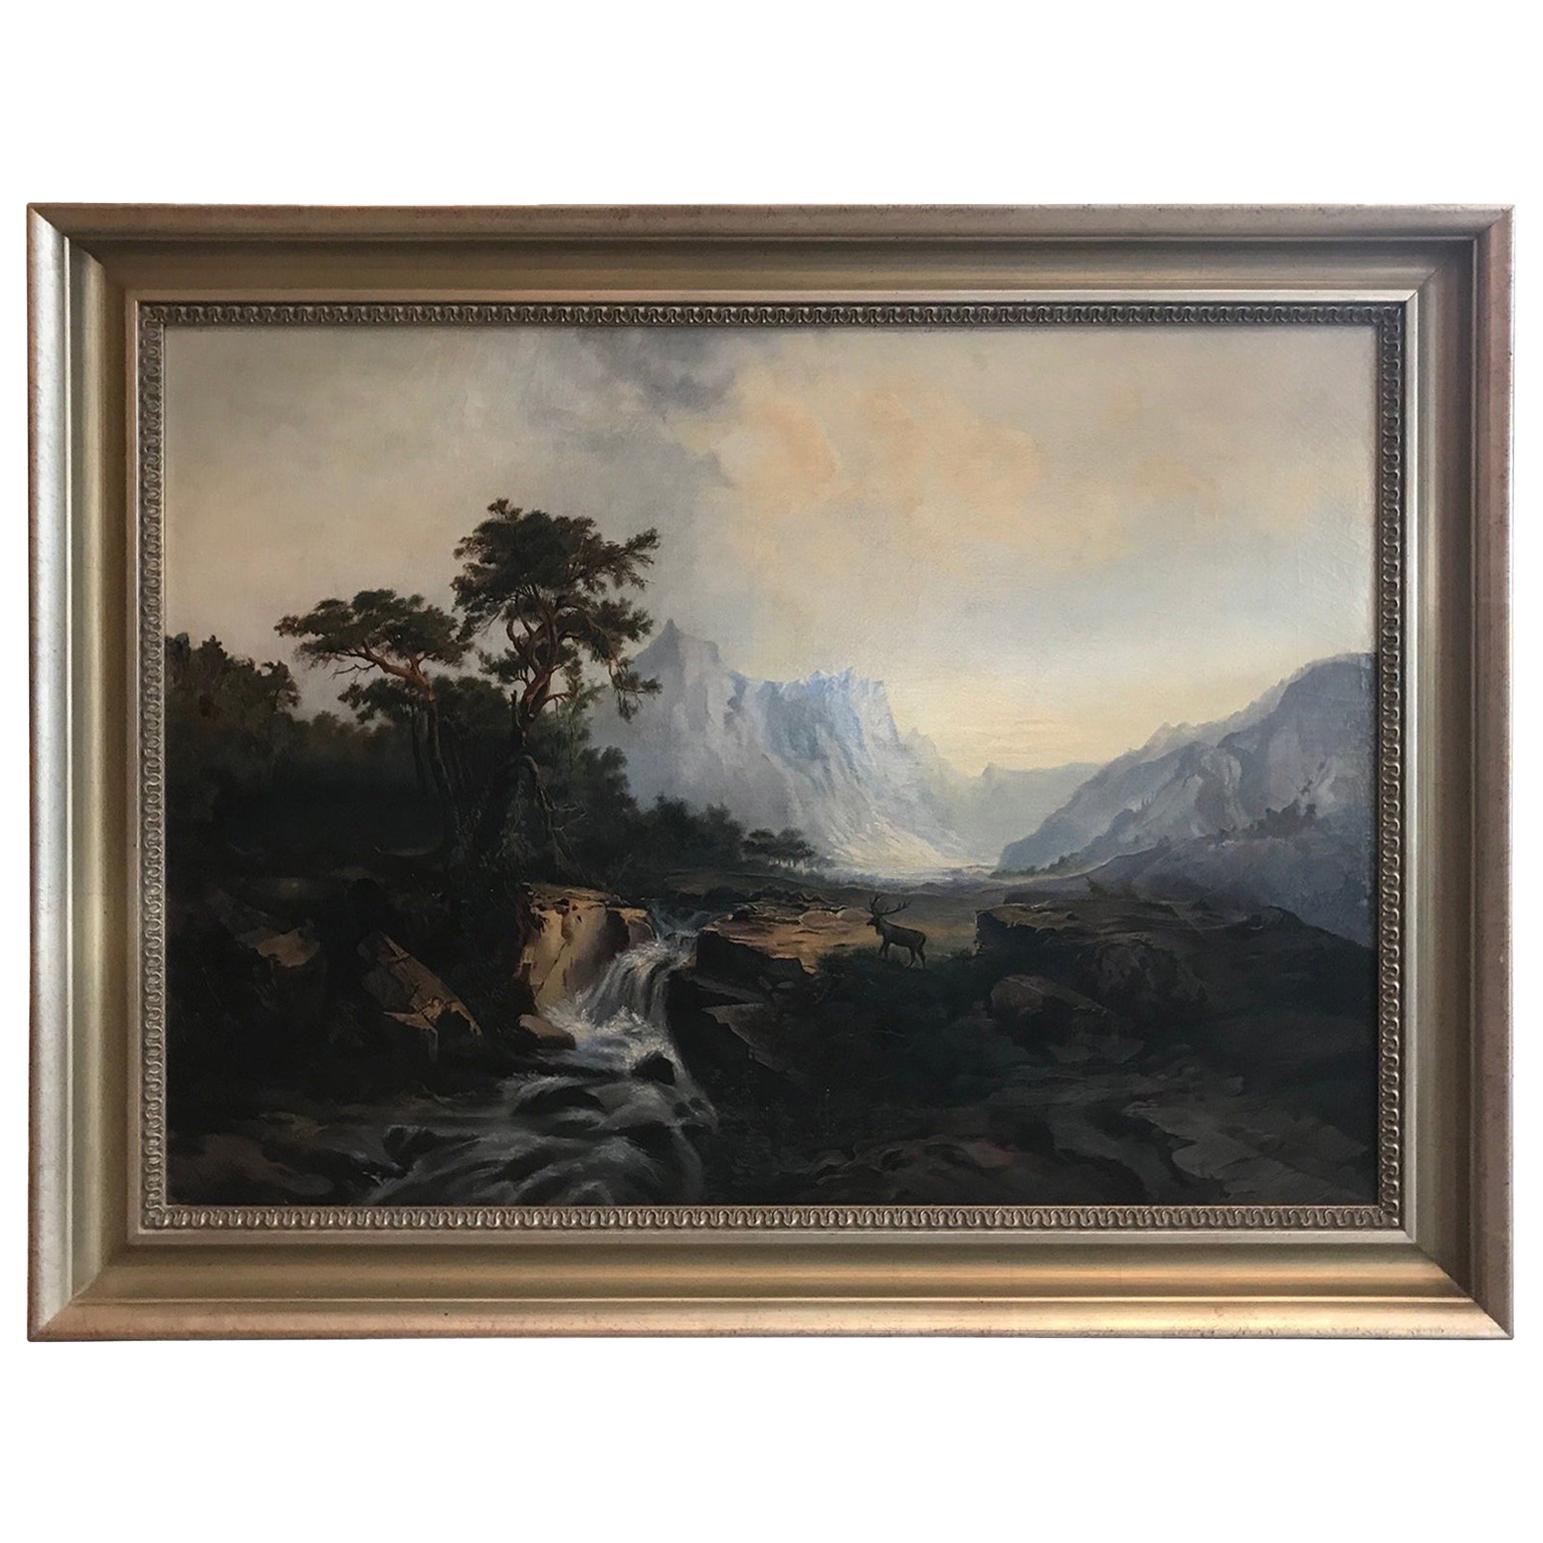 Antique 19th Century European Oil Painting on Canvas Signed M. L. Tunner, 1872 For Sale